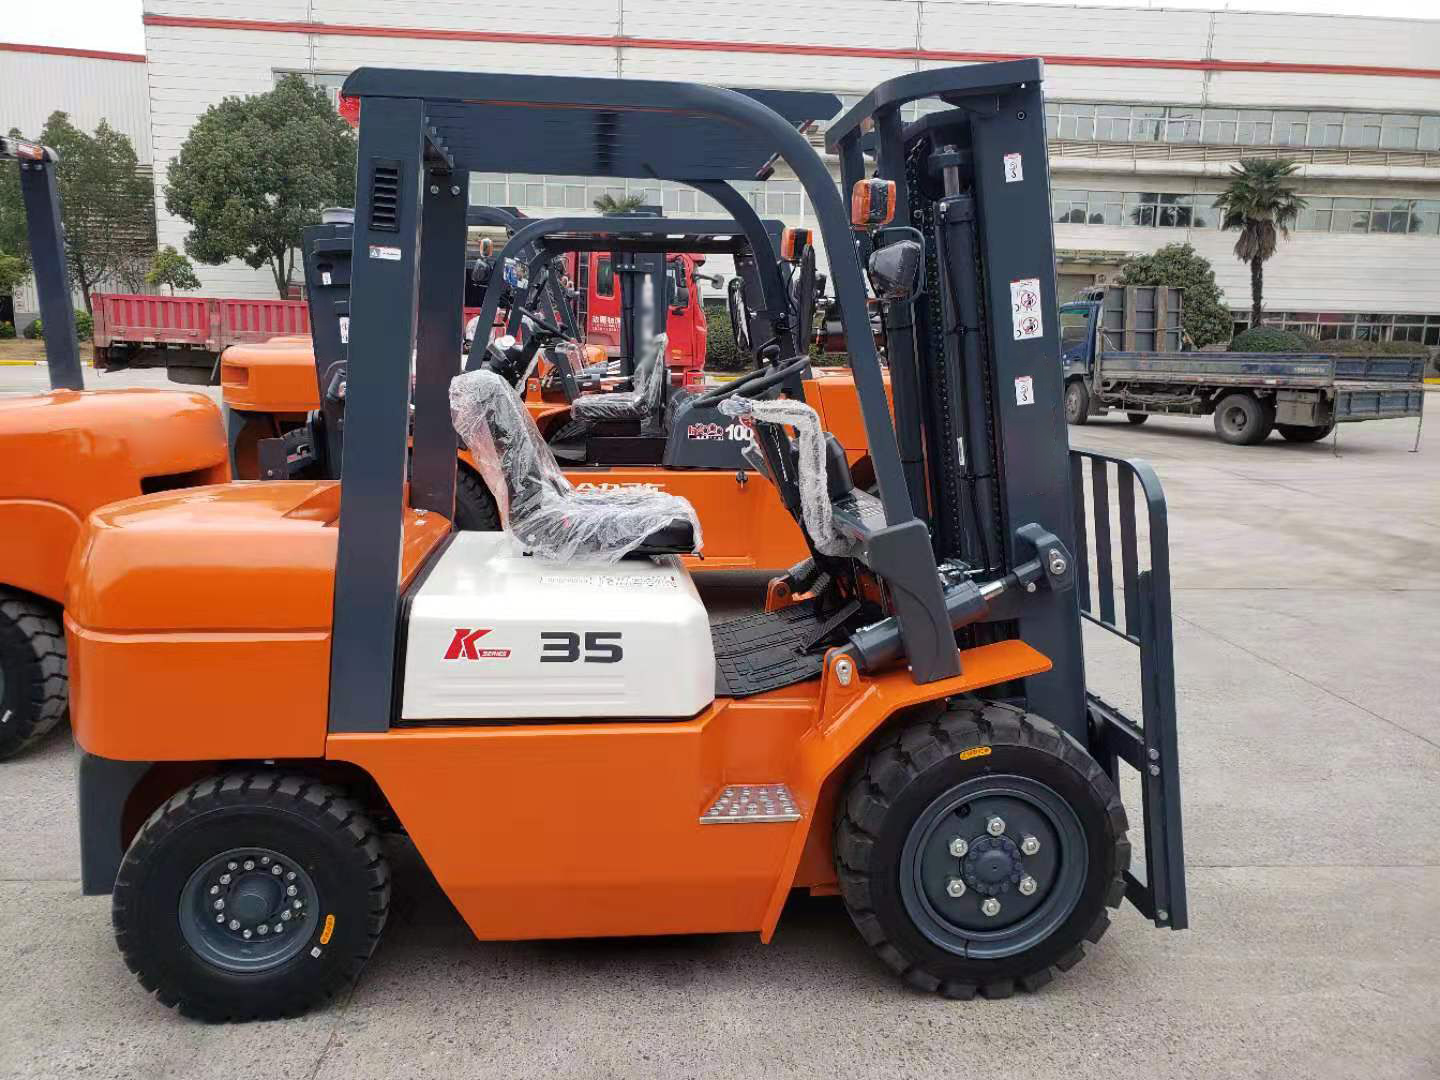 New Forklift Price Heli 3.5 Ton Forklift Cpcd35